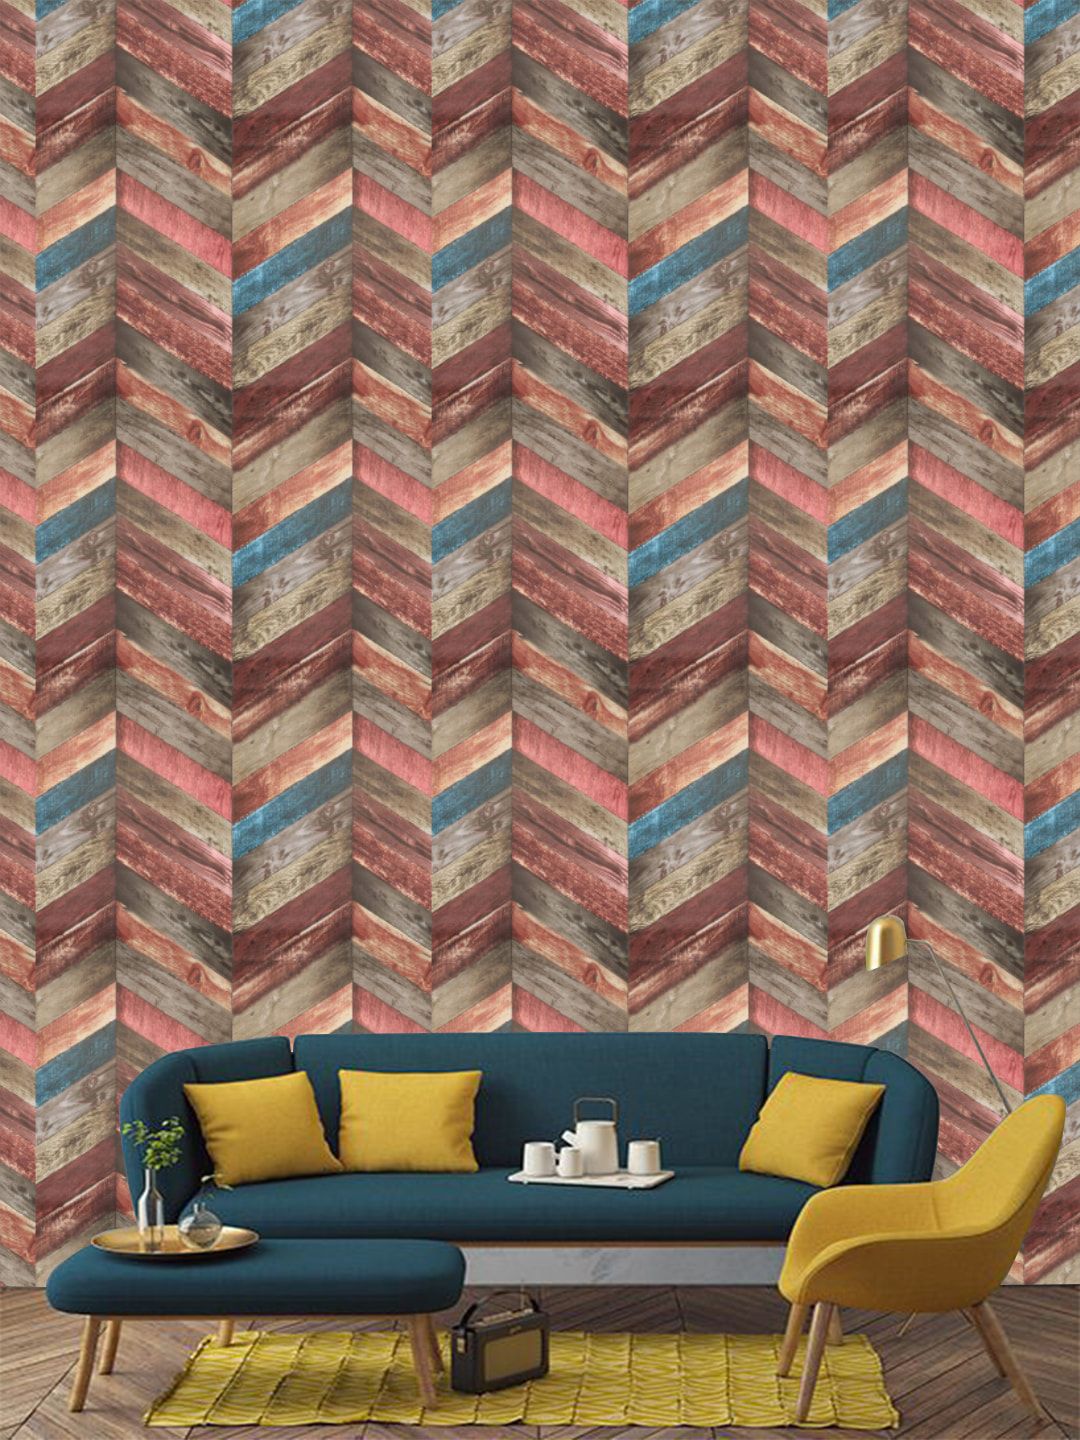 Jaamso Royals Multicolour Self Adhesive Wallpaper Price in India